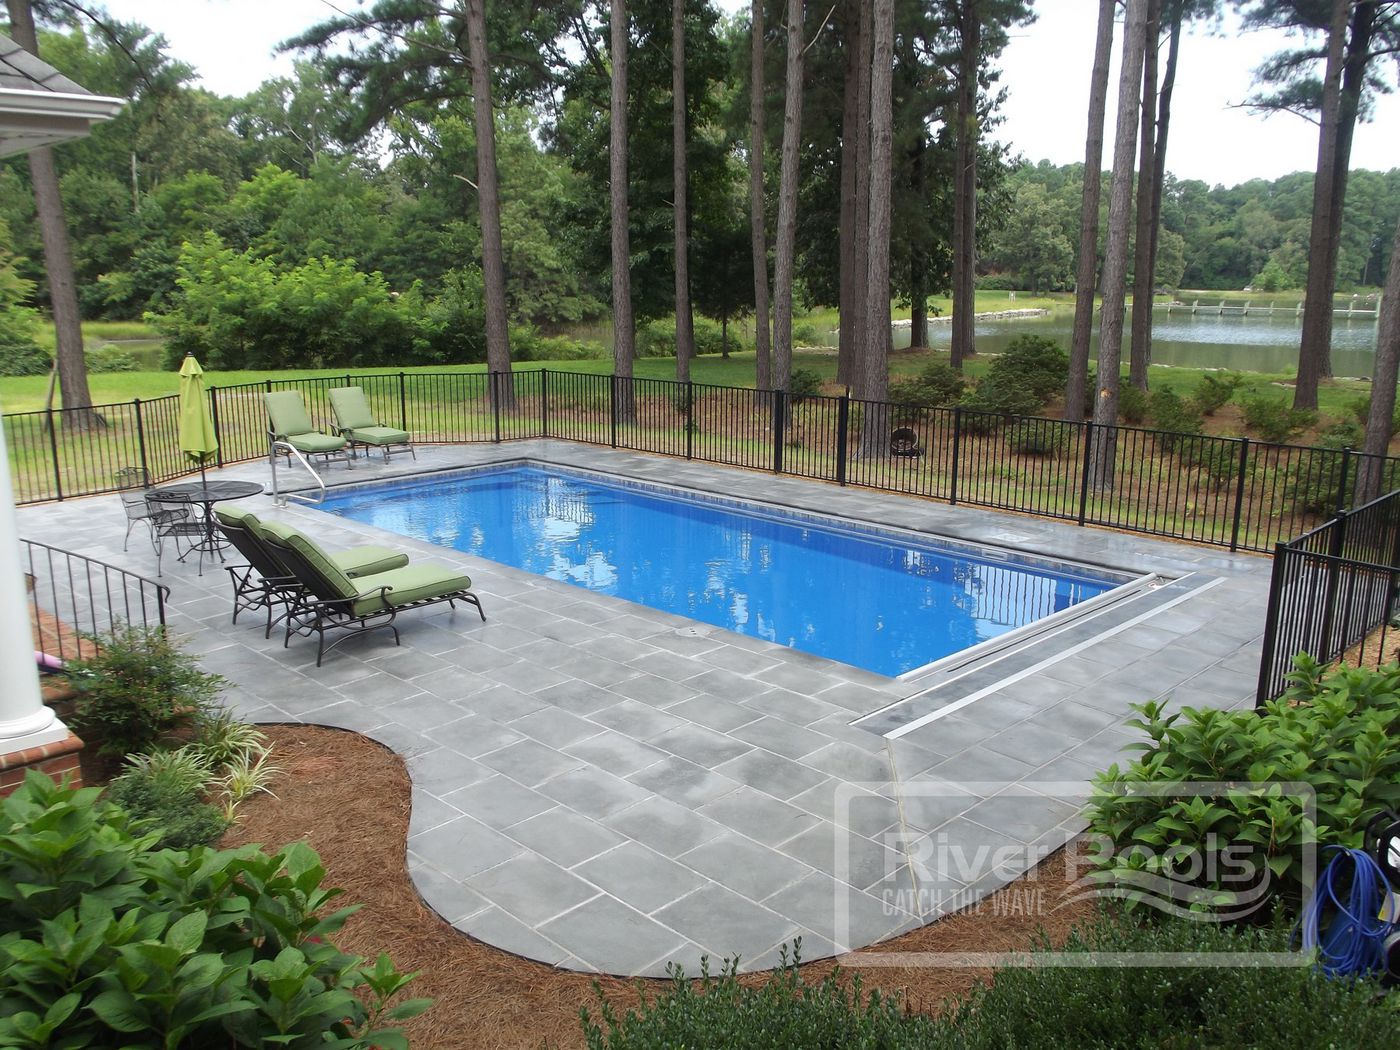 What is the Best Small Pool Design for a Small Yard?